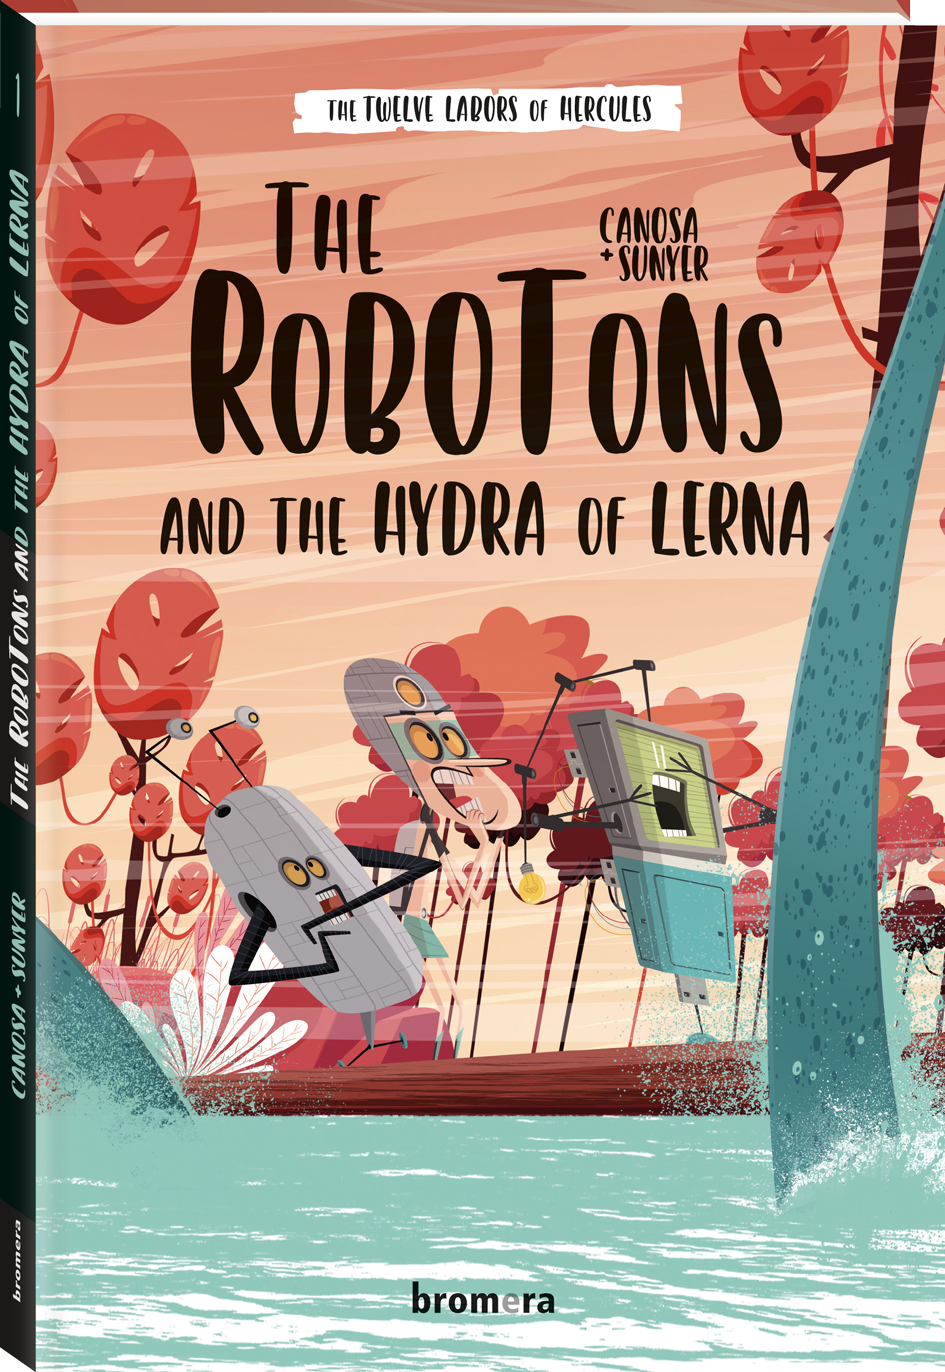 The Robotons and the Hydra of Lerna